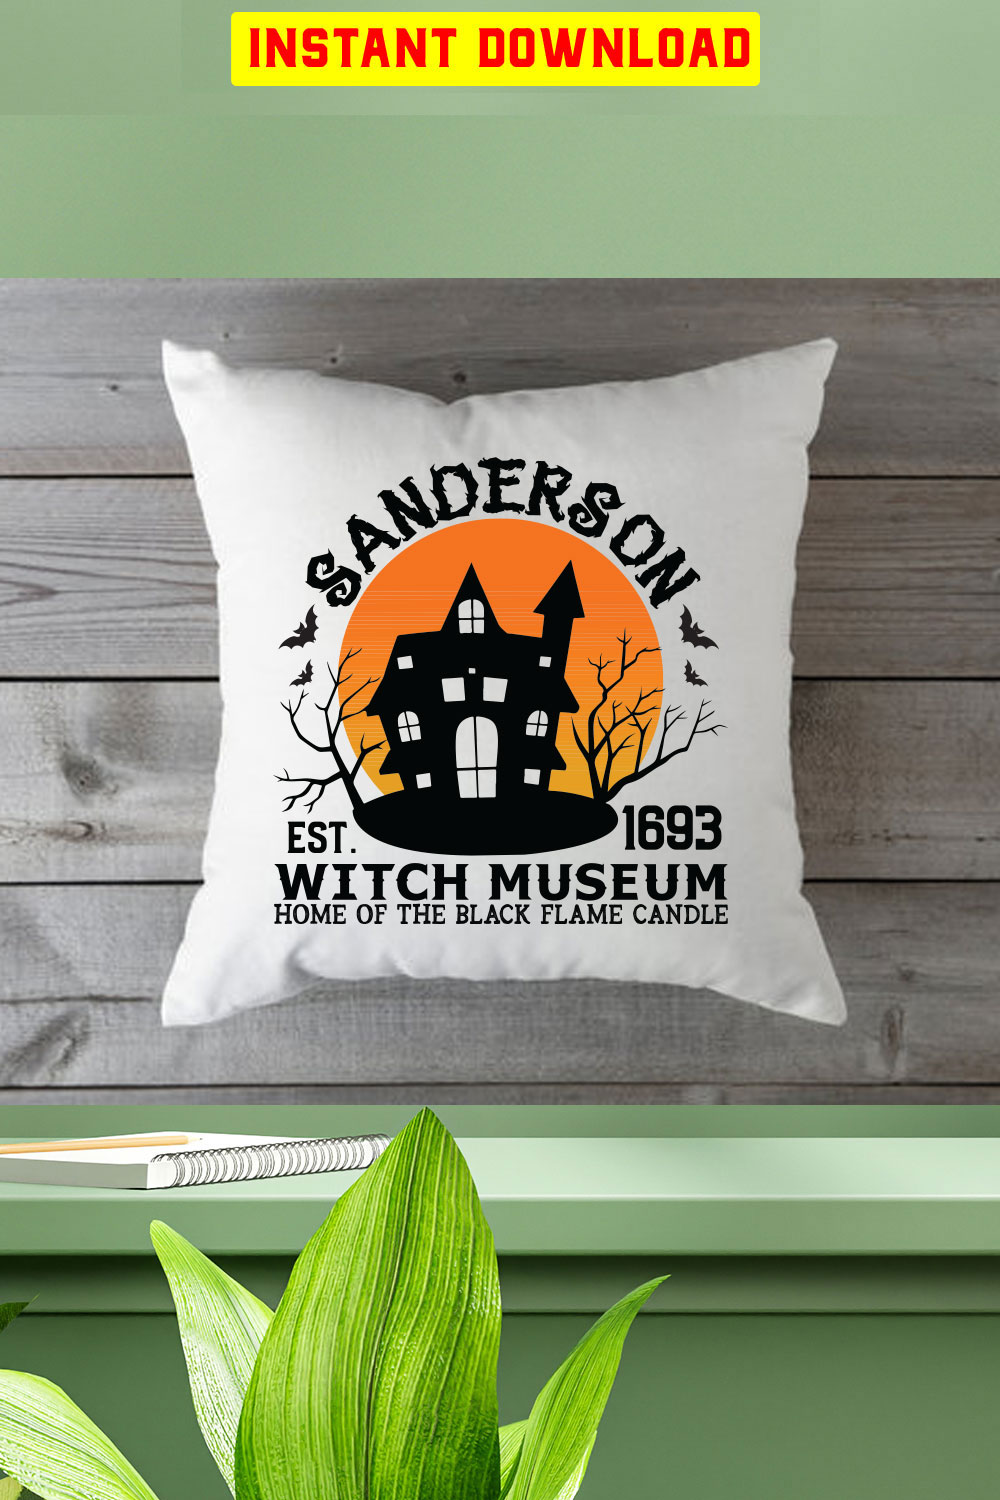 Sanderson Est1693 Witch Museum Home Of The Black Flame Candle pinterest preview image.